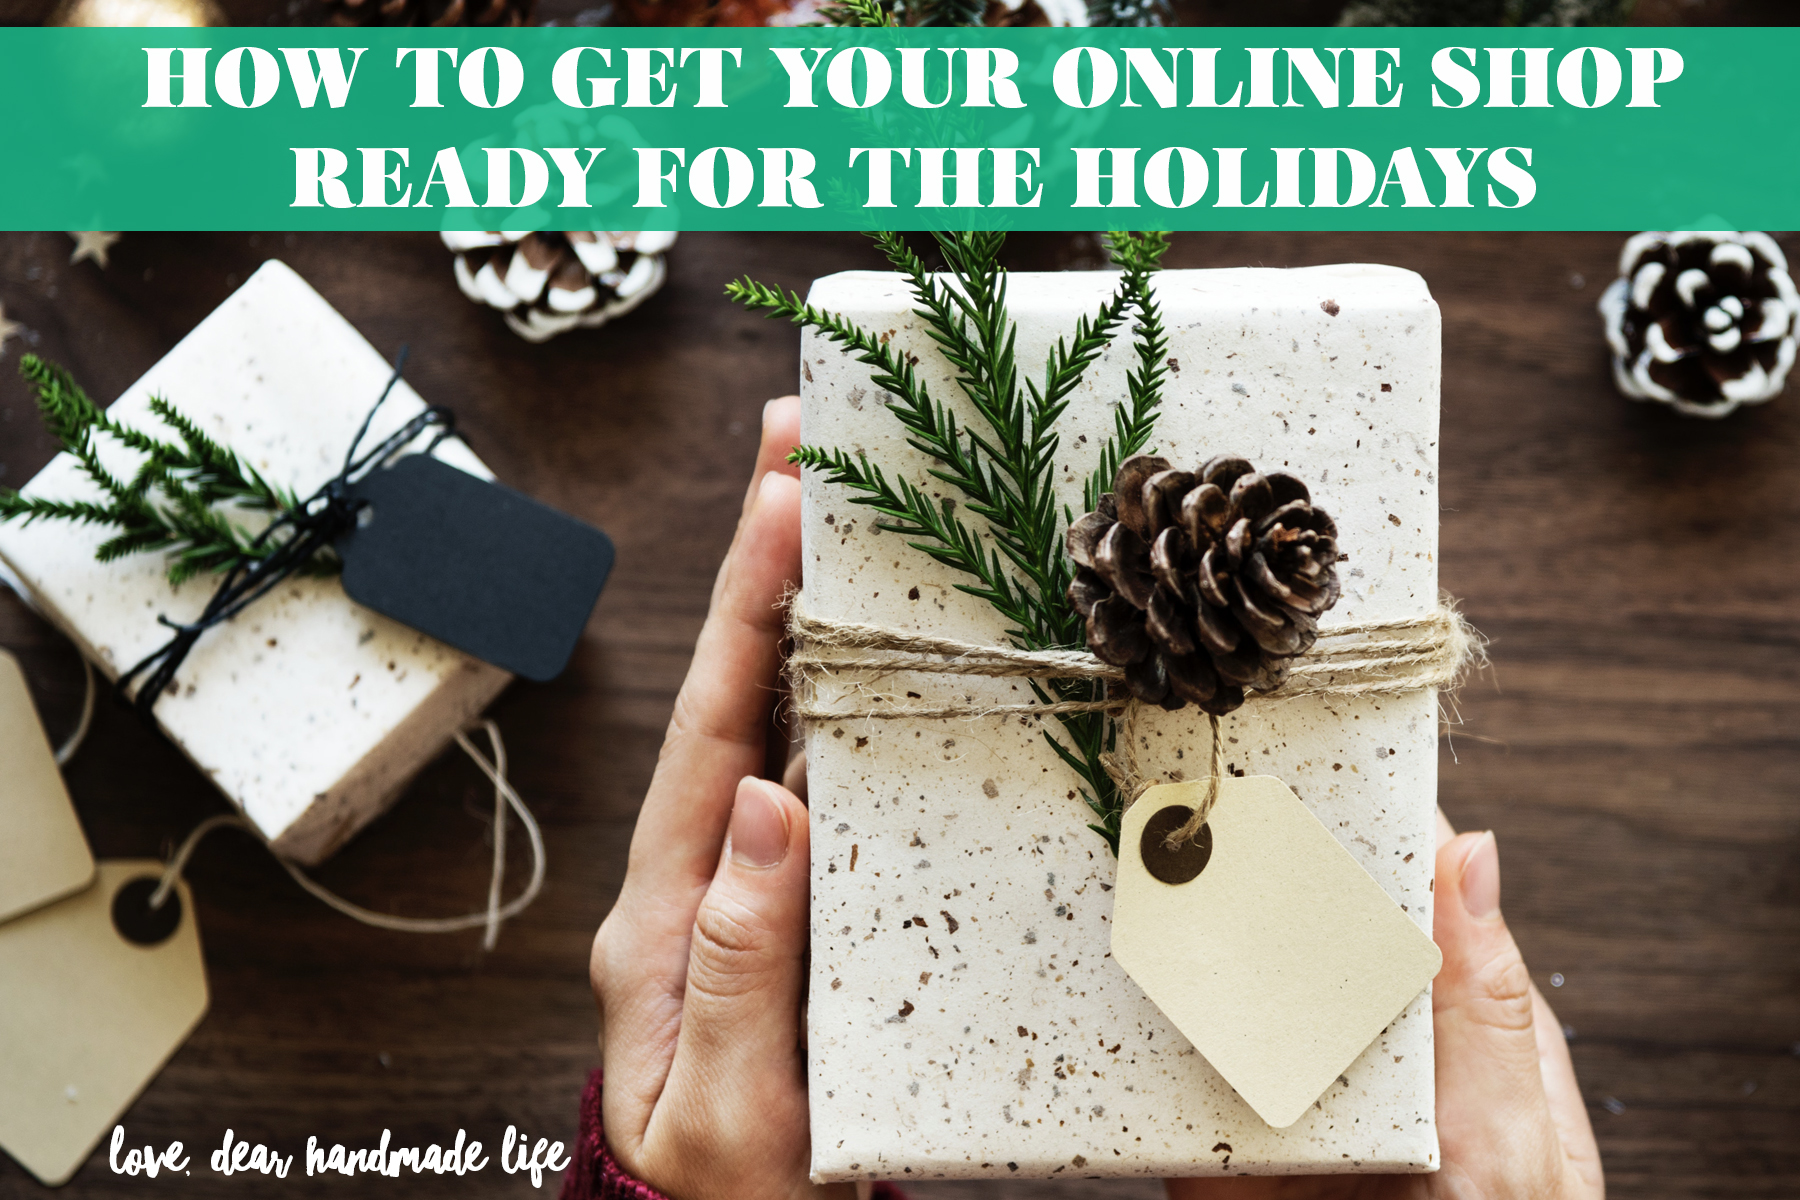 How to Get Your Online Shop Ready for the Holidays from Dear Handmade Life